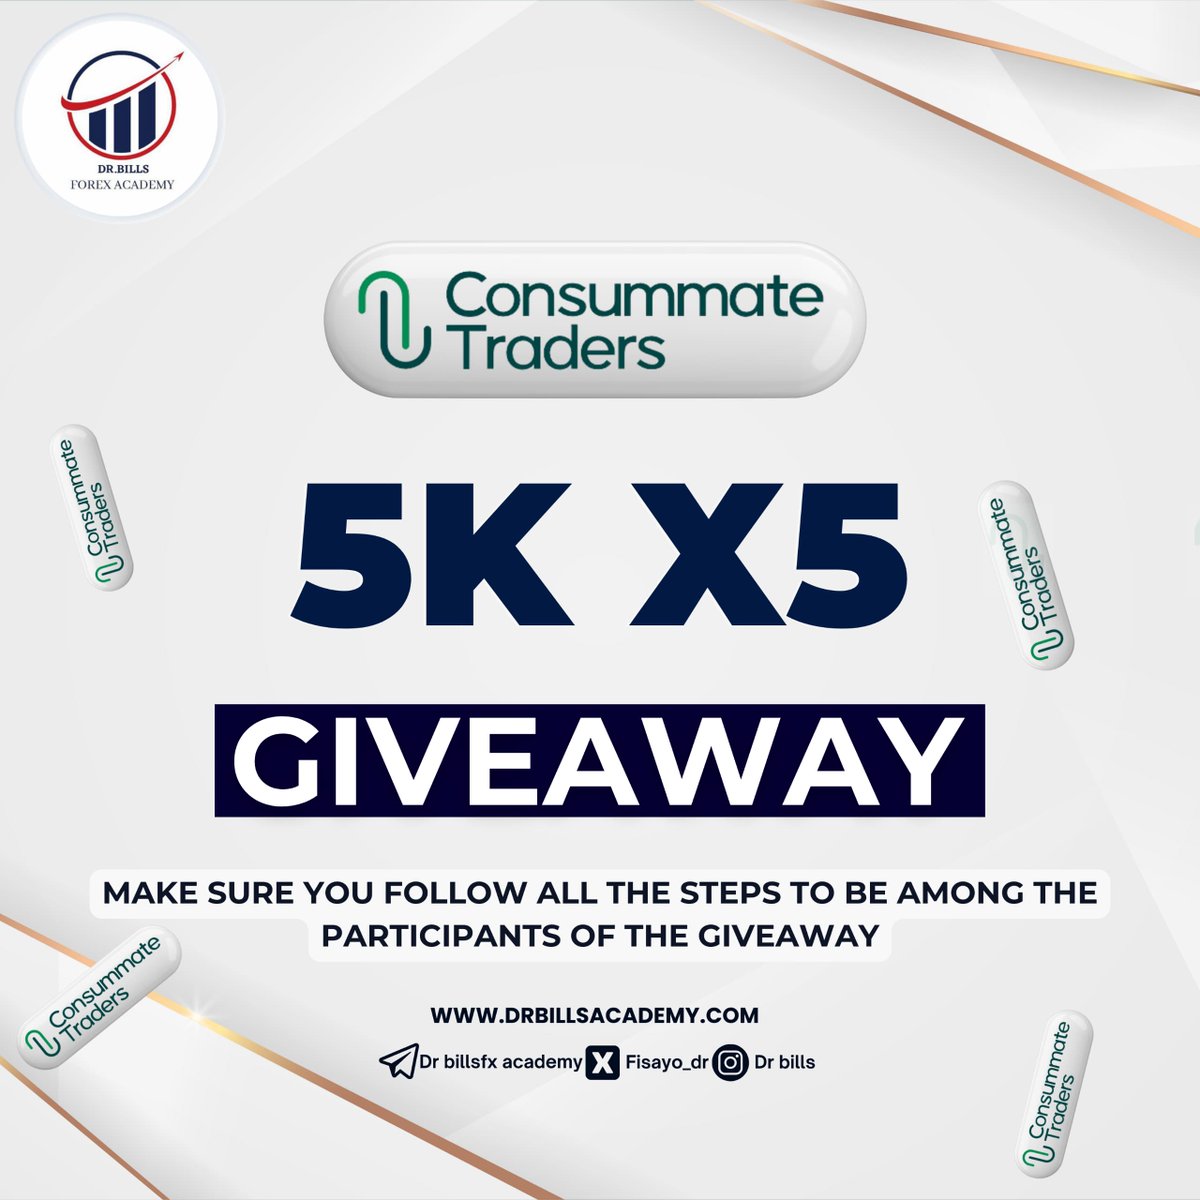 $25k Consummate Evaluation Account Giveaway 🎁.
(5 x 5k Evaluation Accounts)

I’ll be giving out 5 X $5,000 @ConsummateTrdrs accounts 

To participate,
kindly✅subscribe to my Telegram channel. Link will be in the comment section

✅ Follow @ConsummateTrdrs @fisayo_dr @Aygramm_